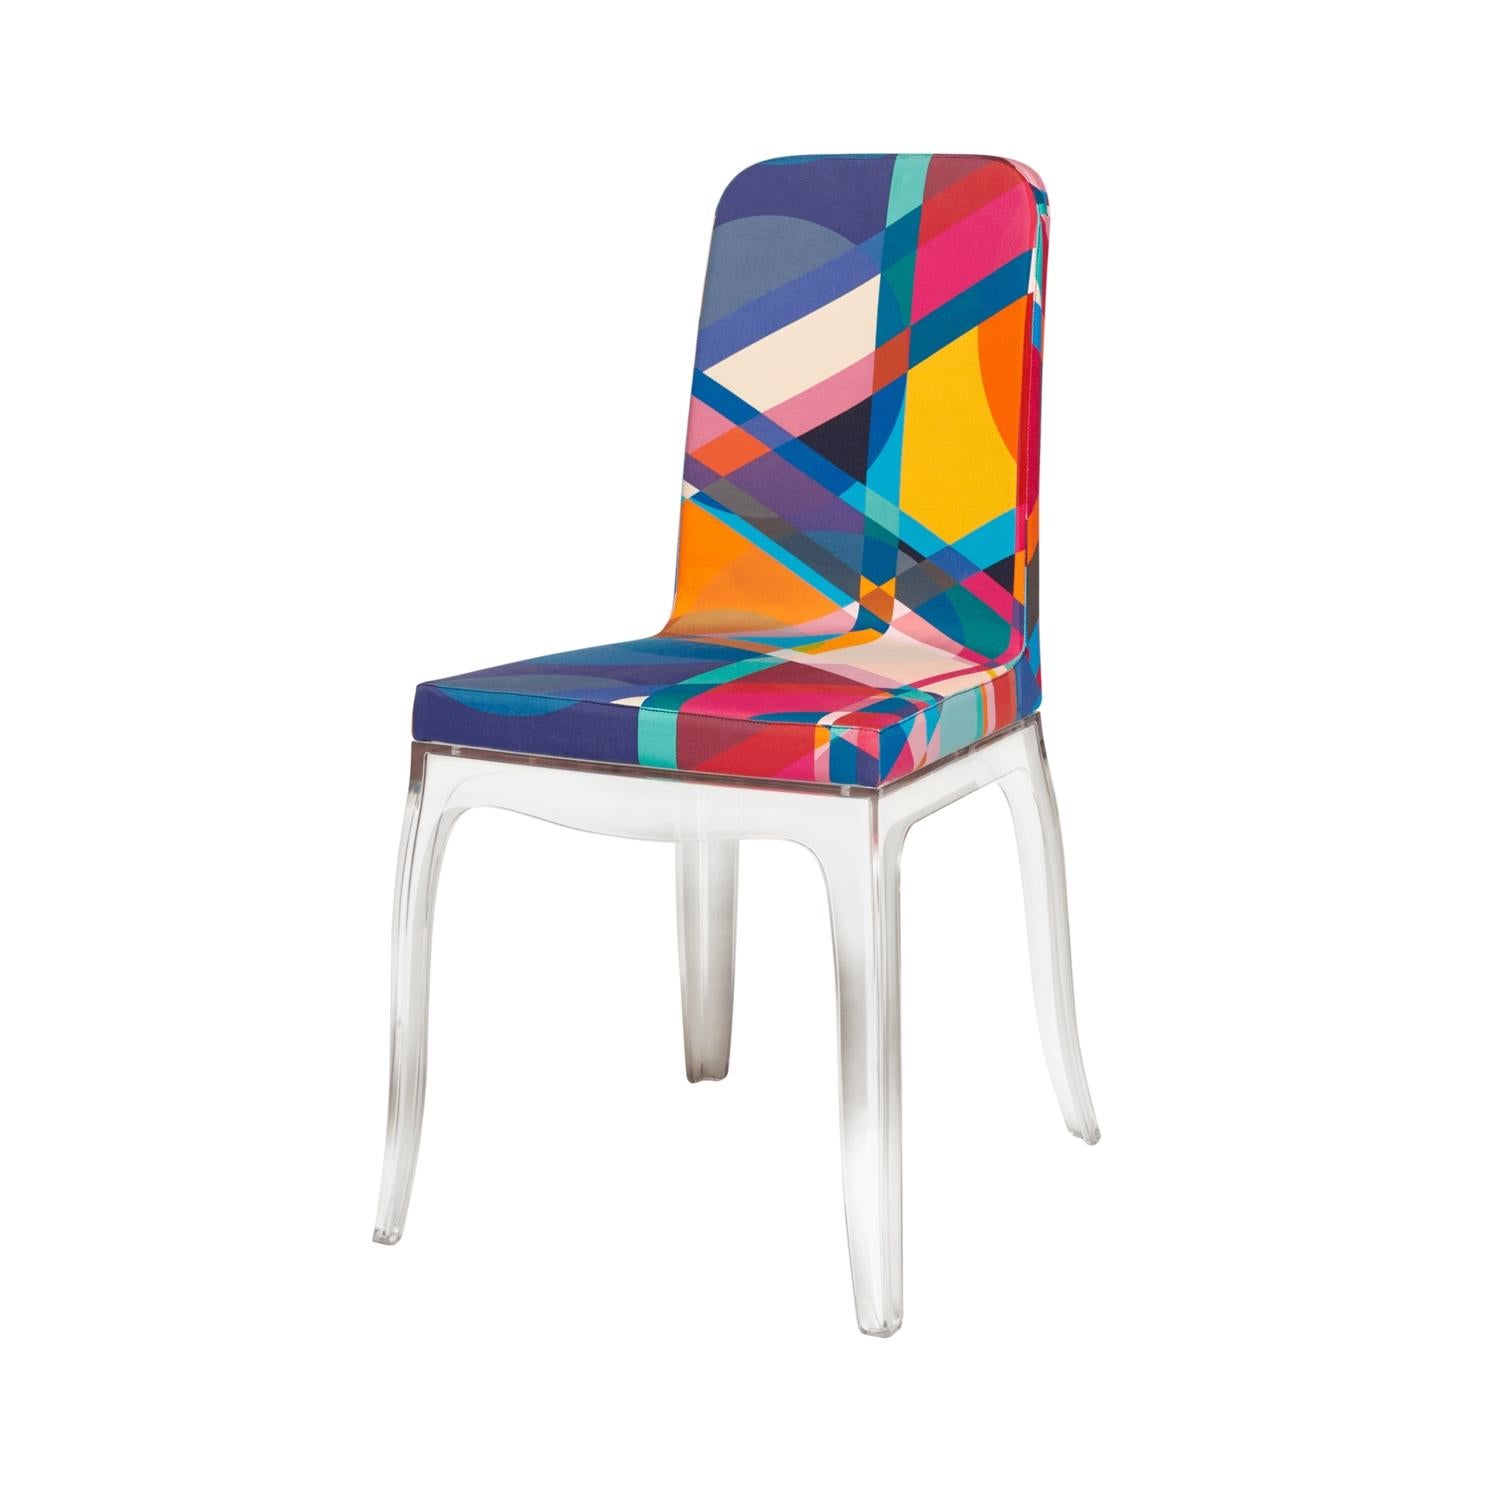 Set of 4 Moibibi Colorful Dining Chairs Designed by Marcel Wanders (Moderne)